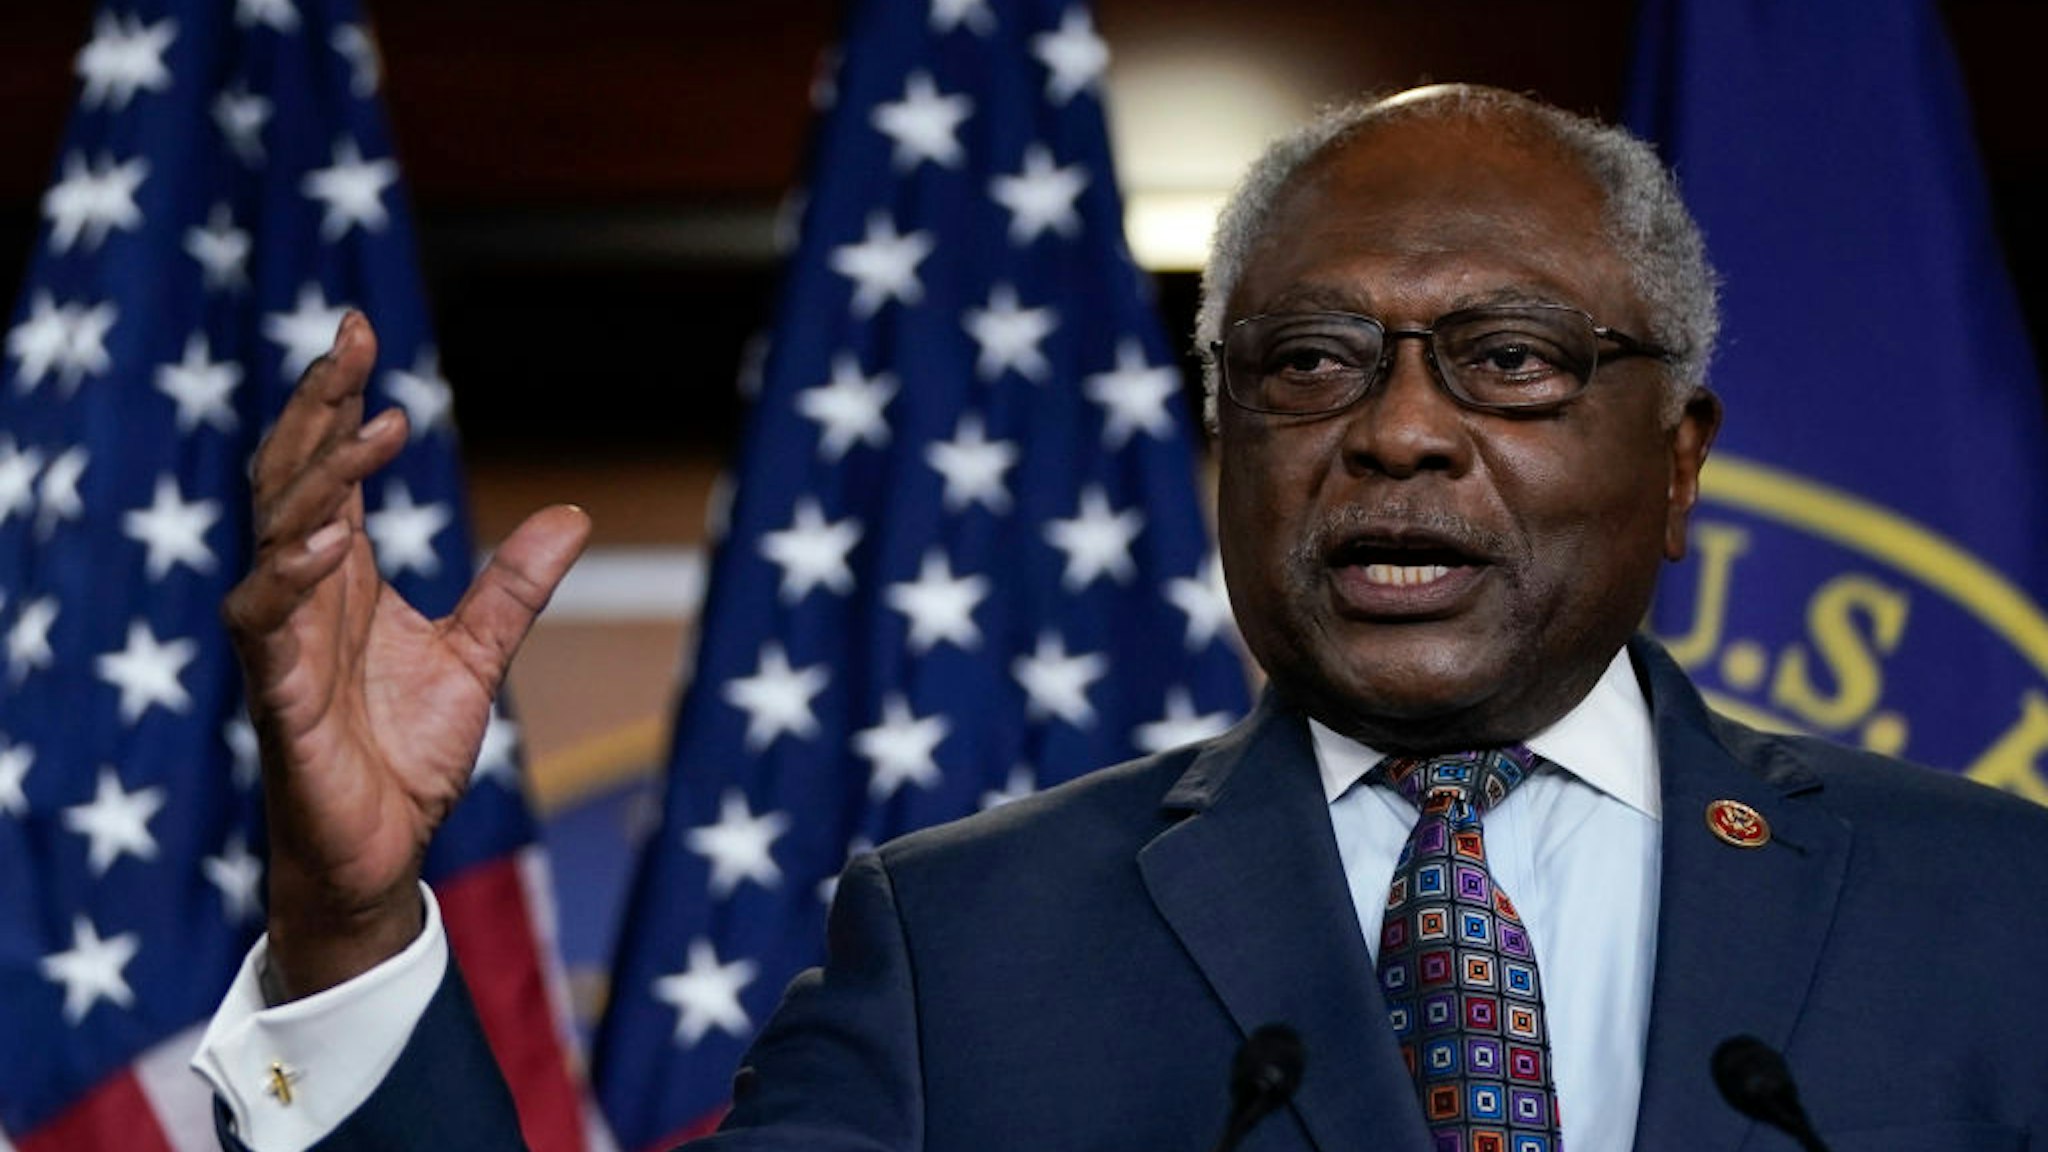 House Majority Whip Rep. James Clyburn (D-SC) speaks during a news conference at the U.S. Capitol, May 27, 2020 in Washington, DC.